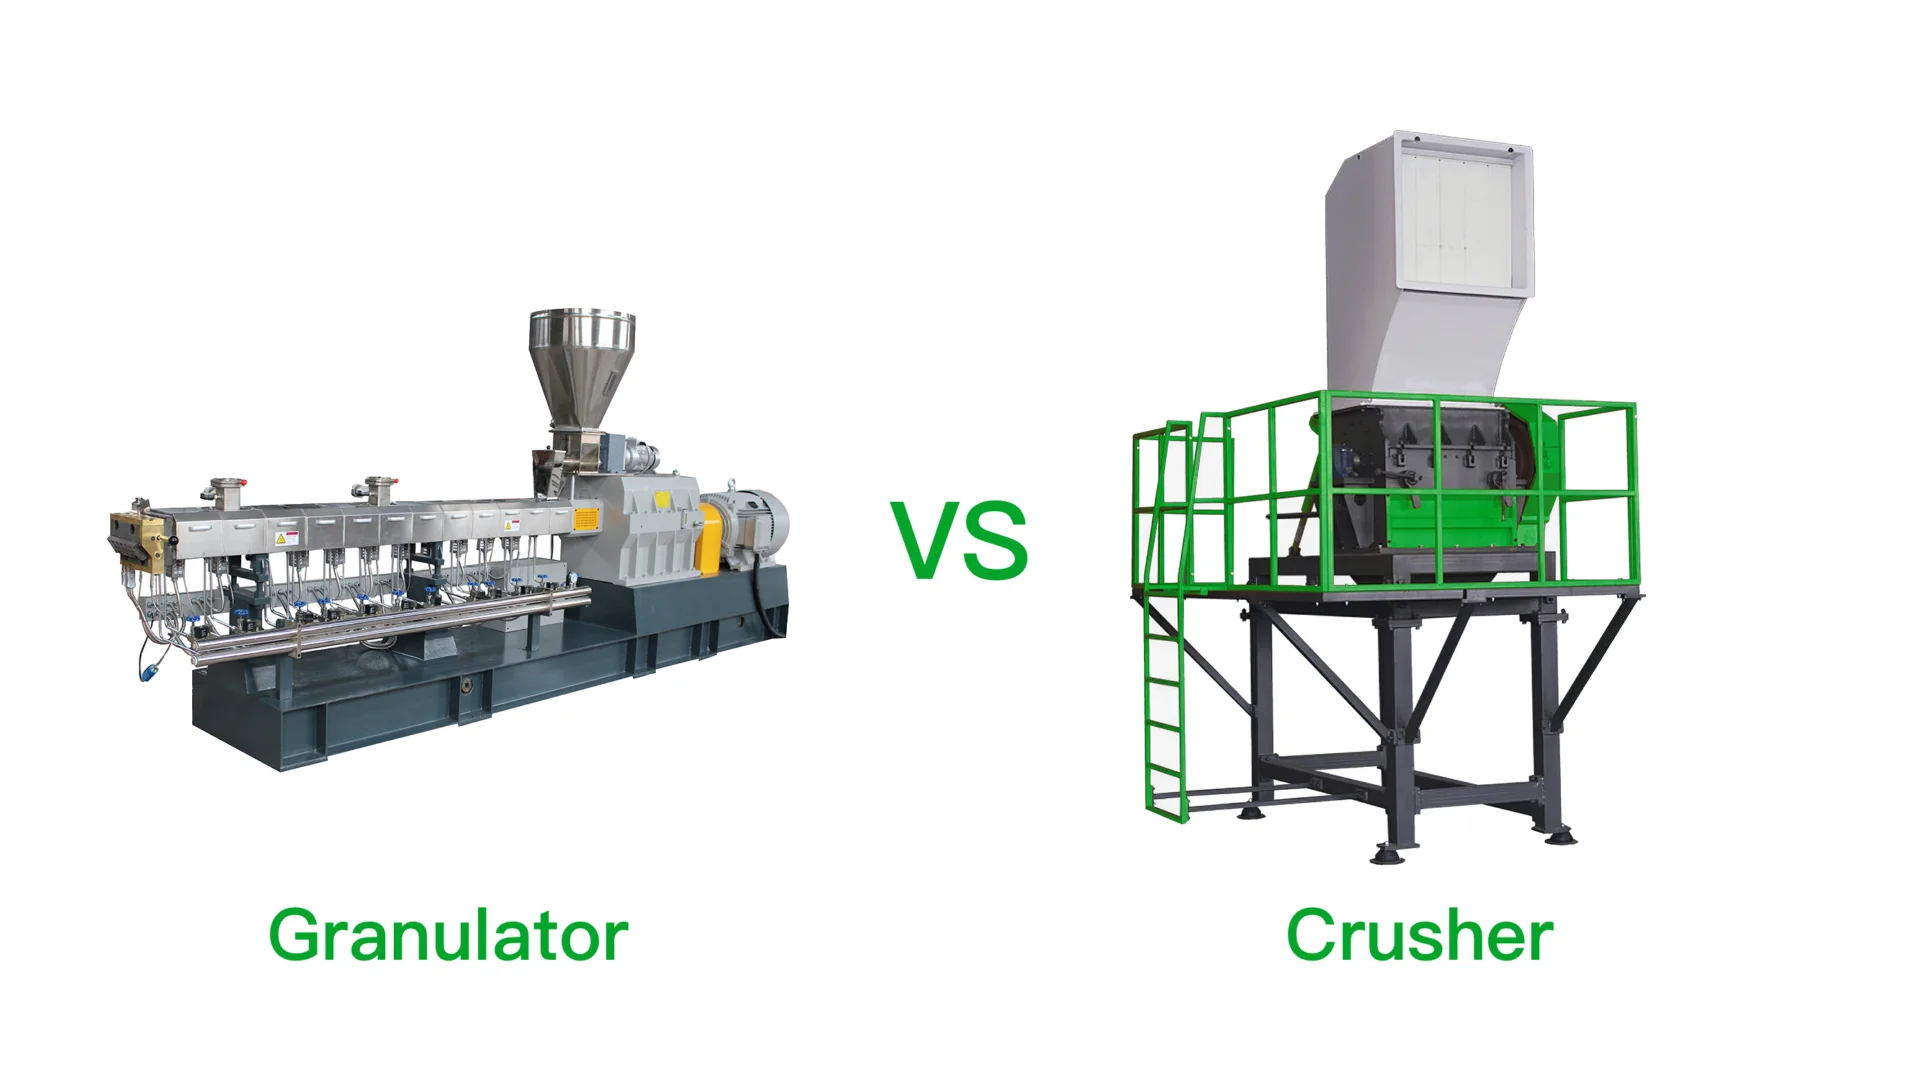 The picture shows a comparison between two types of industrial machinery: a Granulator and a Crusher. On the left side of the image is the Granulator, which is a long, complex machine designed to cut or shred material into smaller pieces. On the right side of the image is the Crusher, which is enclosed in a green safety structure and is used to compress and break down materials into smaller, manageable pieces. The text "vs" in the center suggests a comparison or evaluation of their functions or efficiencies in processing materials.